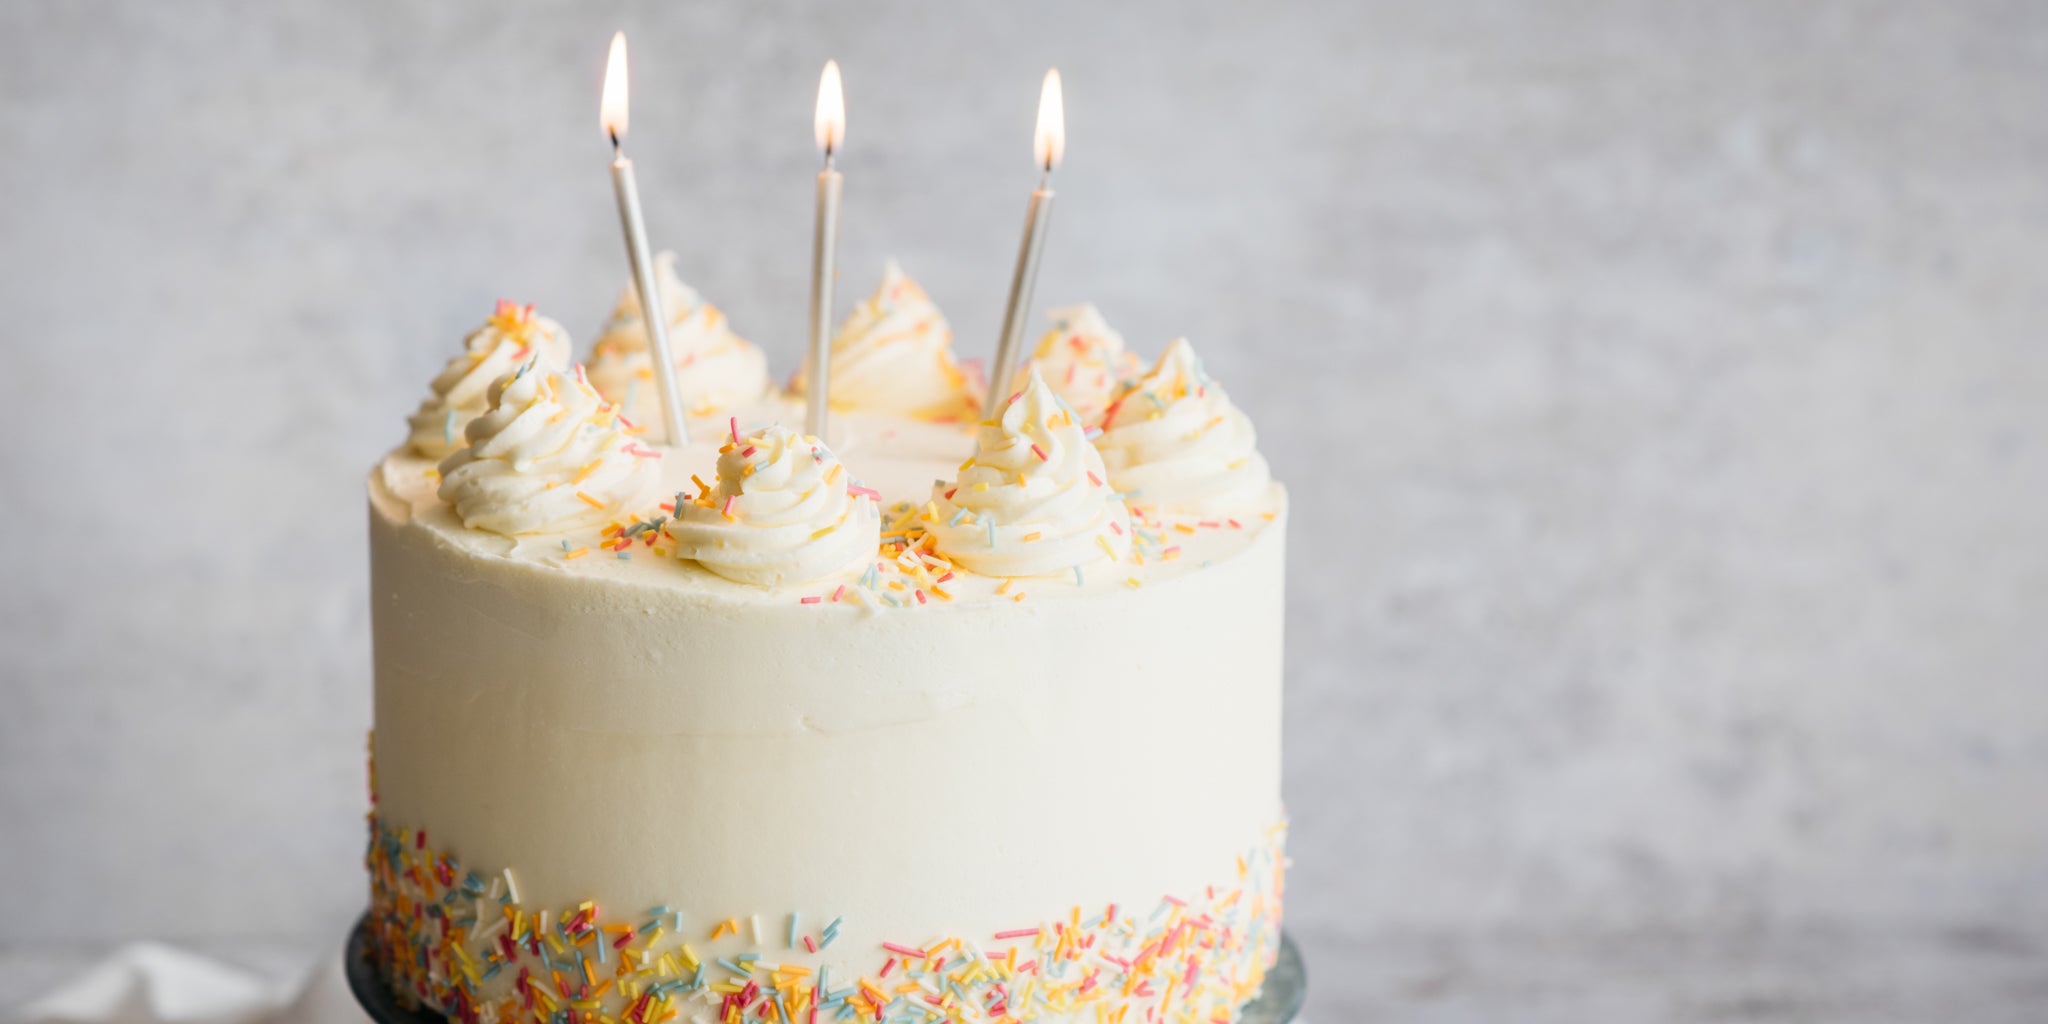 Close up of Vegan Vanilla Cake topped with Vanilla Icing Swirls, and candles stuck into the top, lit for a Birthday